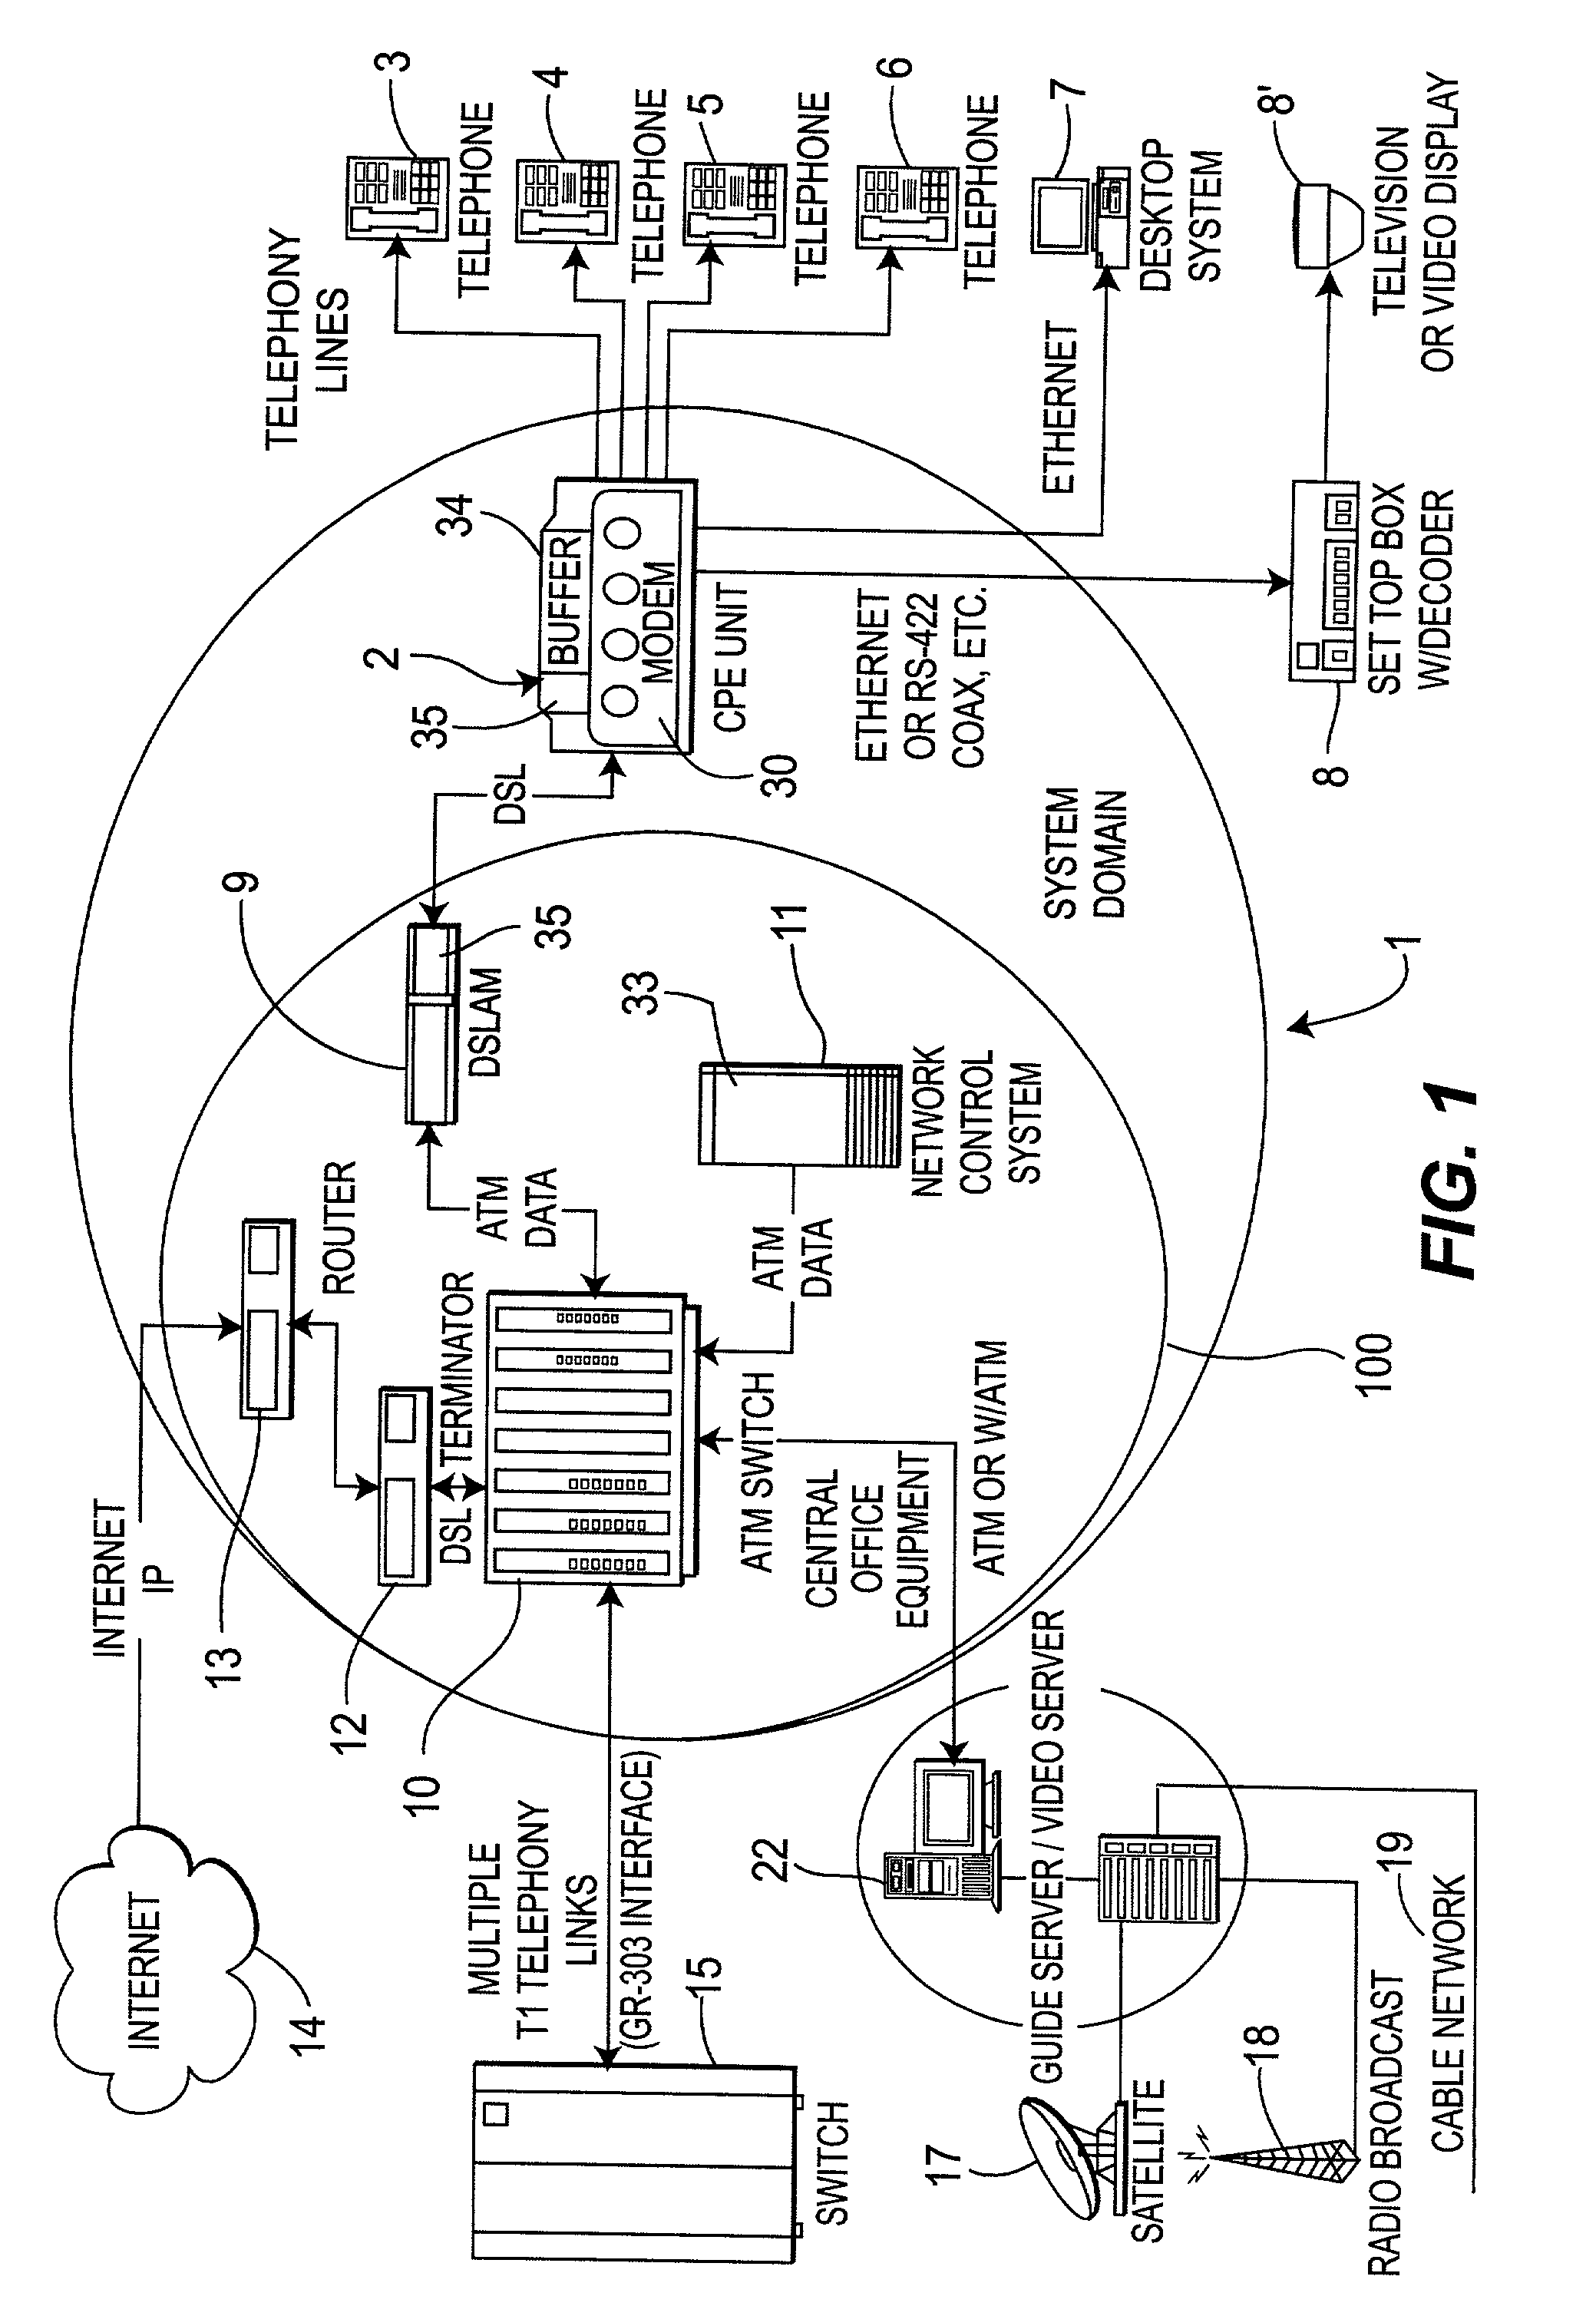 Physical layer recovery in a streaming data delivery system